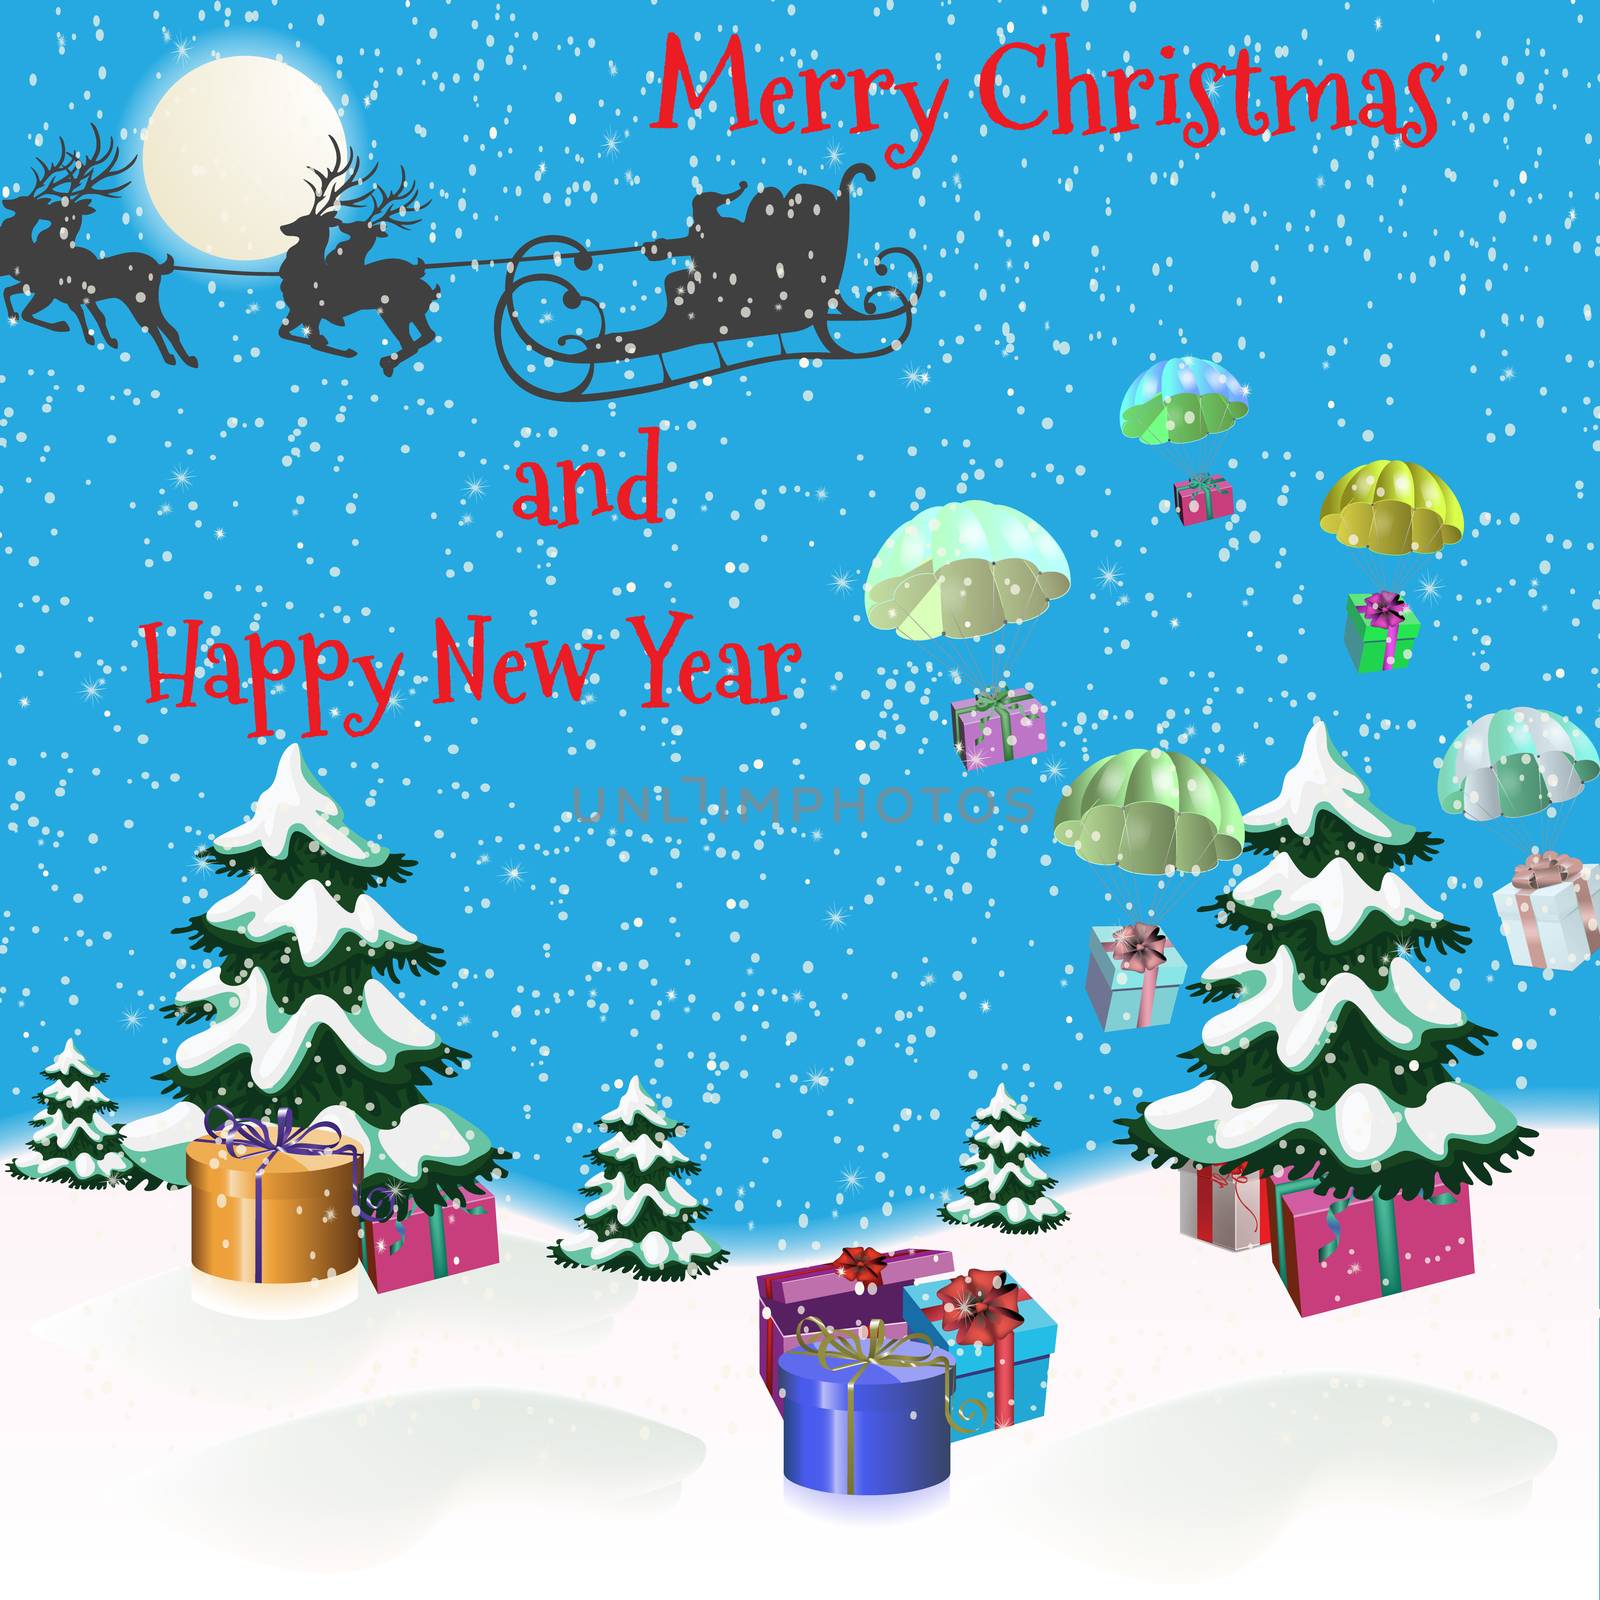 Christmas picture with Christmas trees, Santa Claus and gifts and greeting text